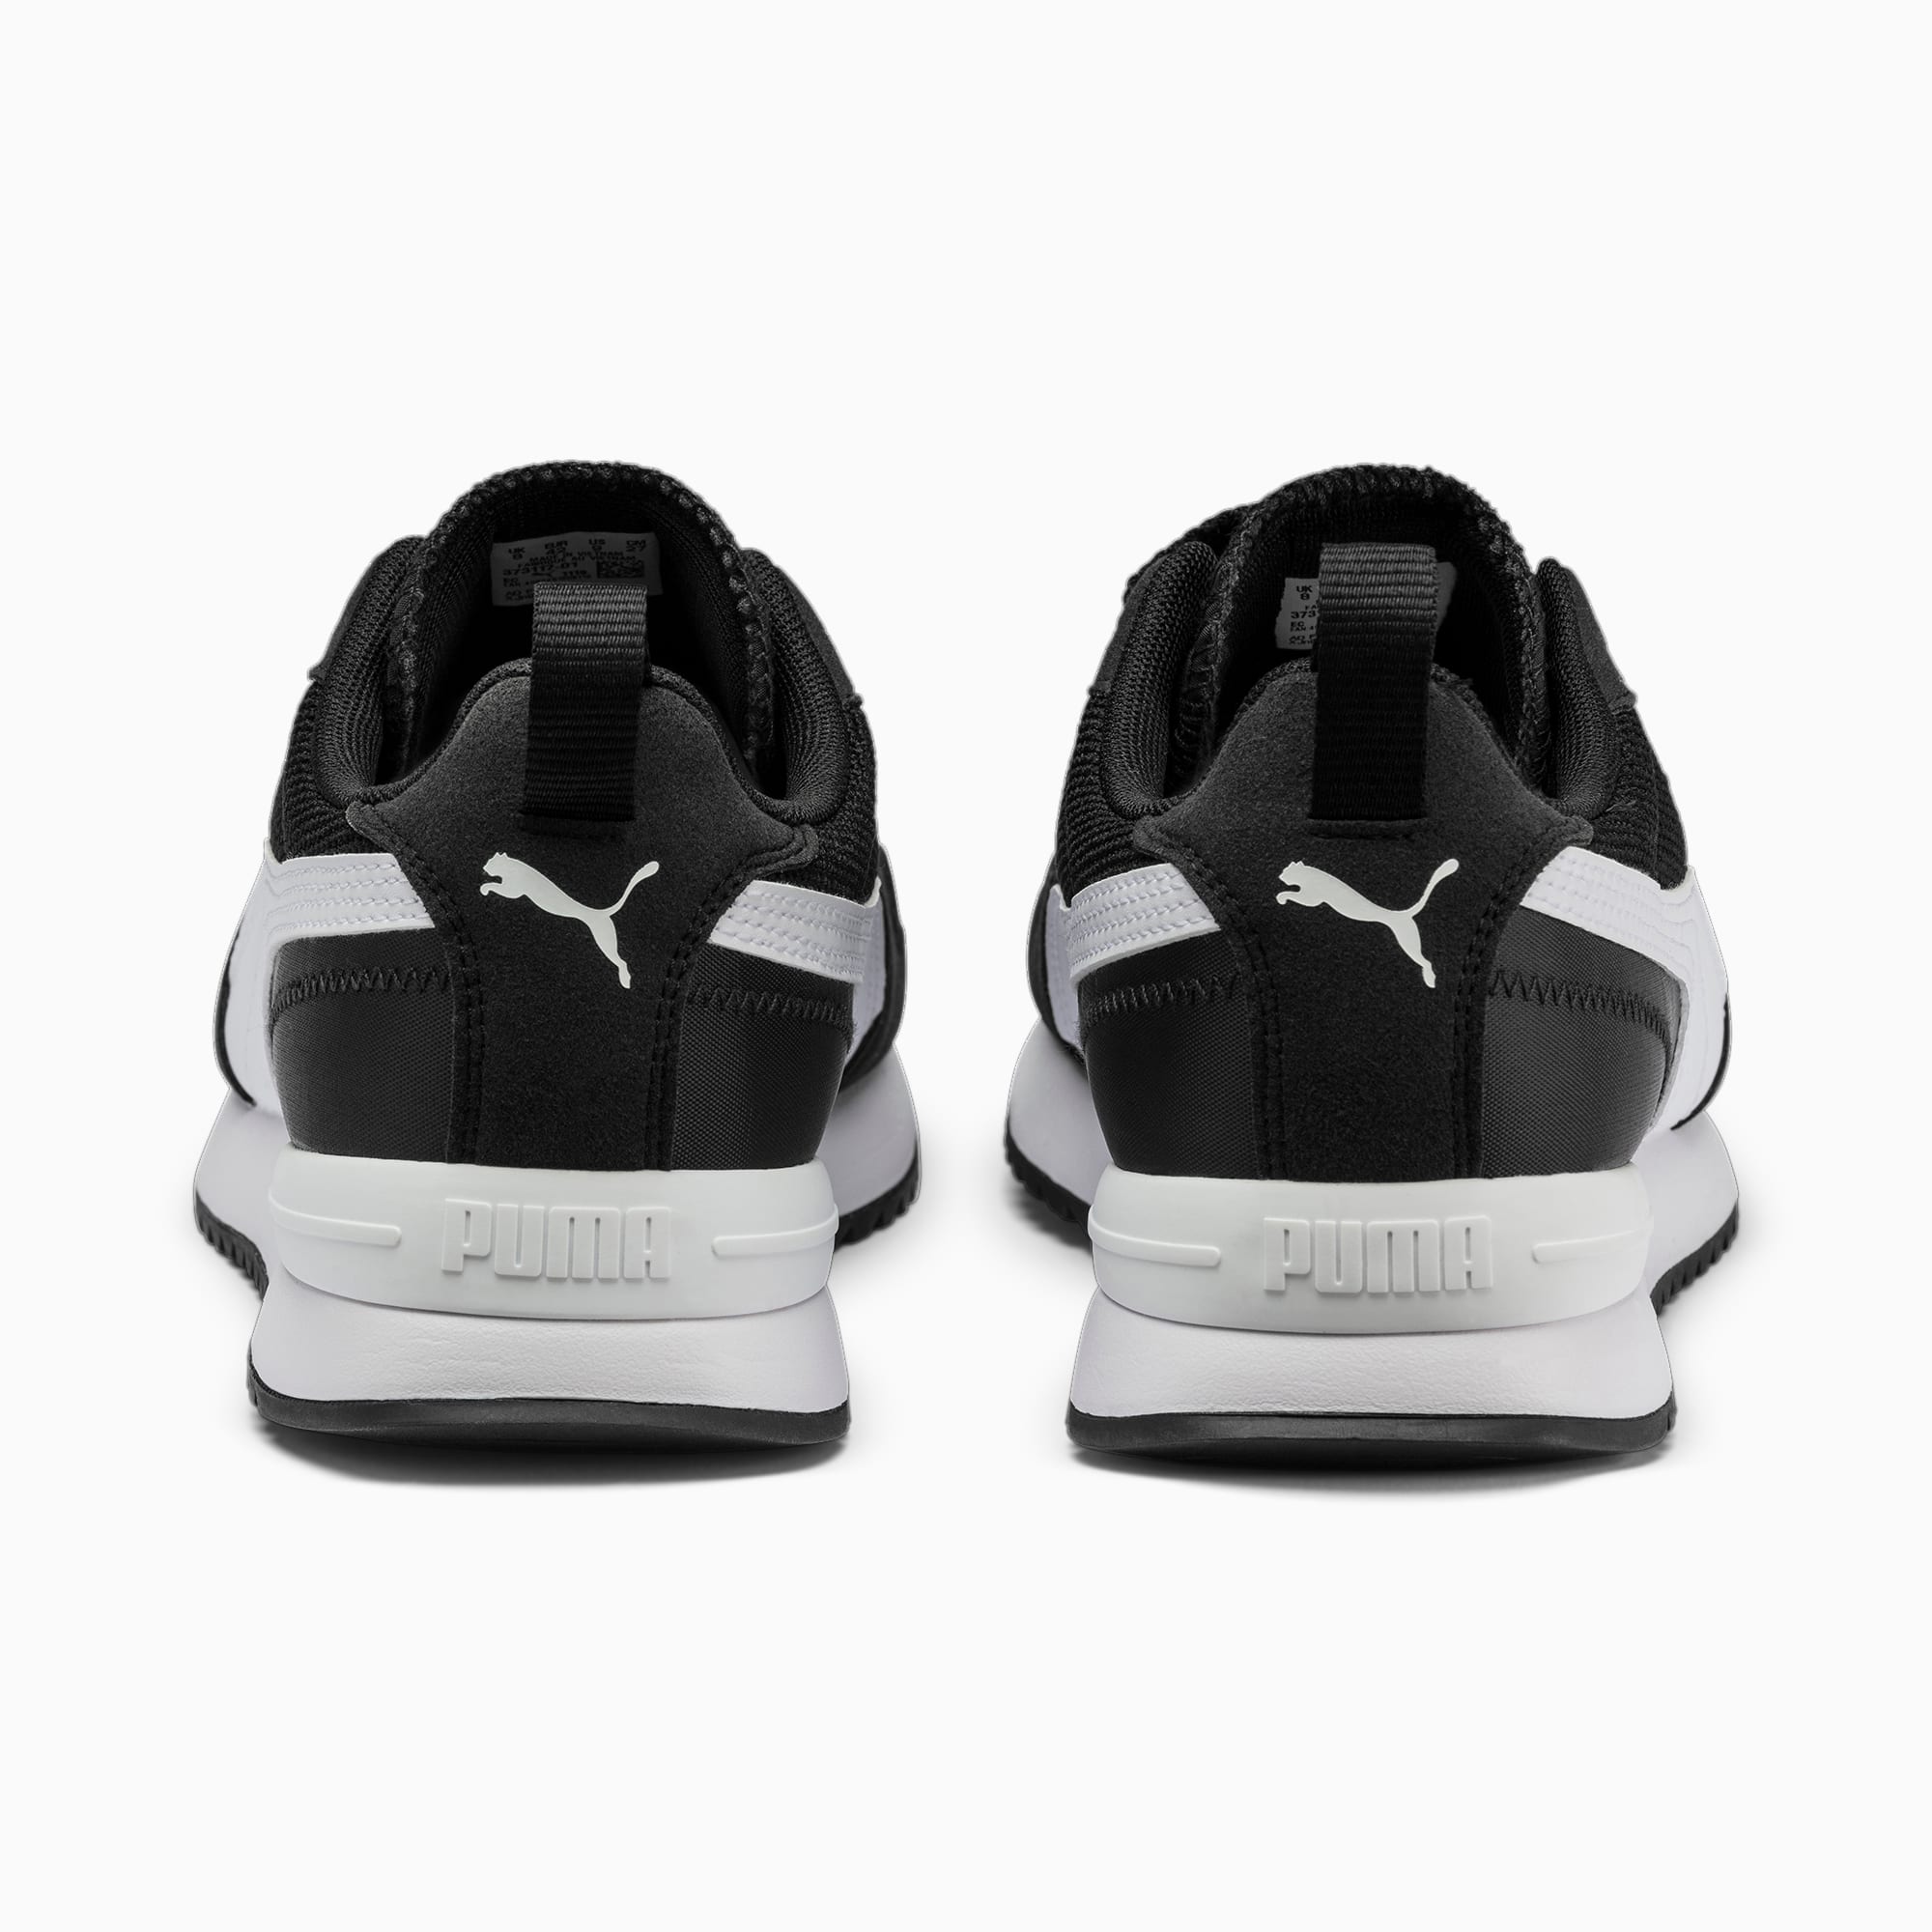 Women's PUMA R78 Runner Trainers, Black/White, Size 36, Shoes